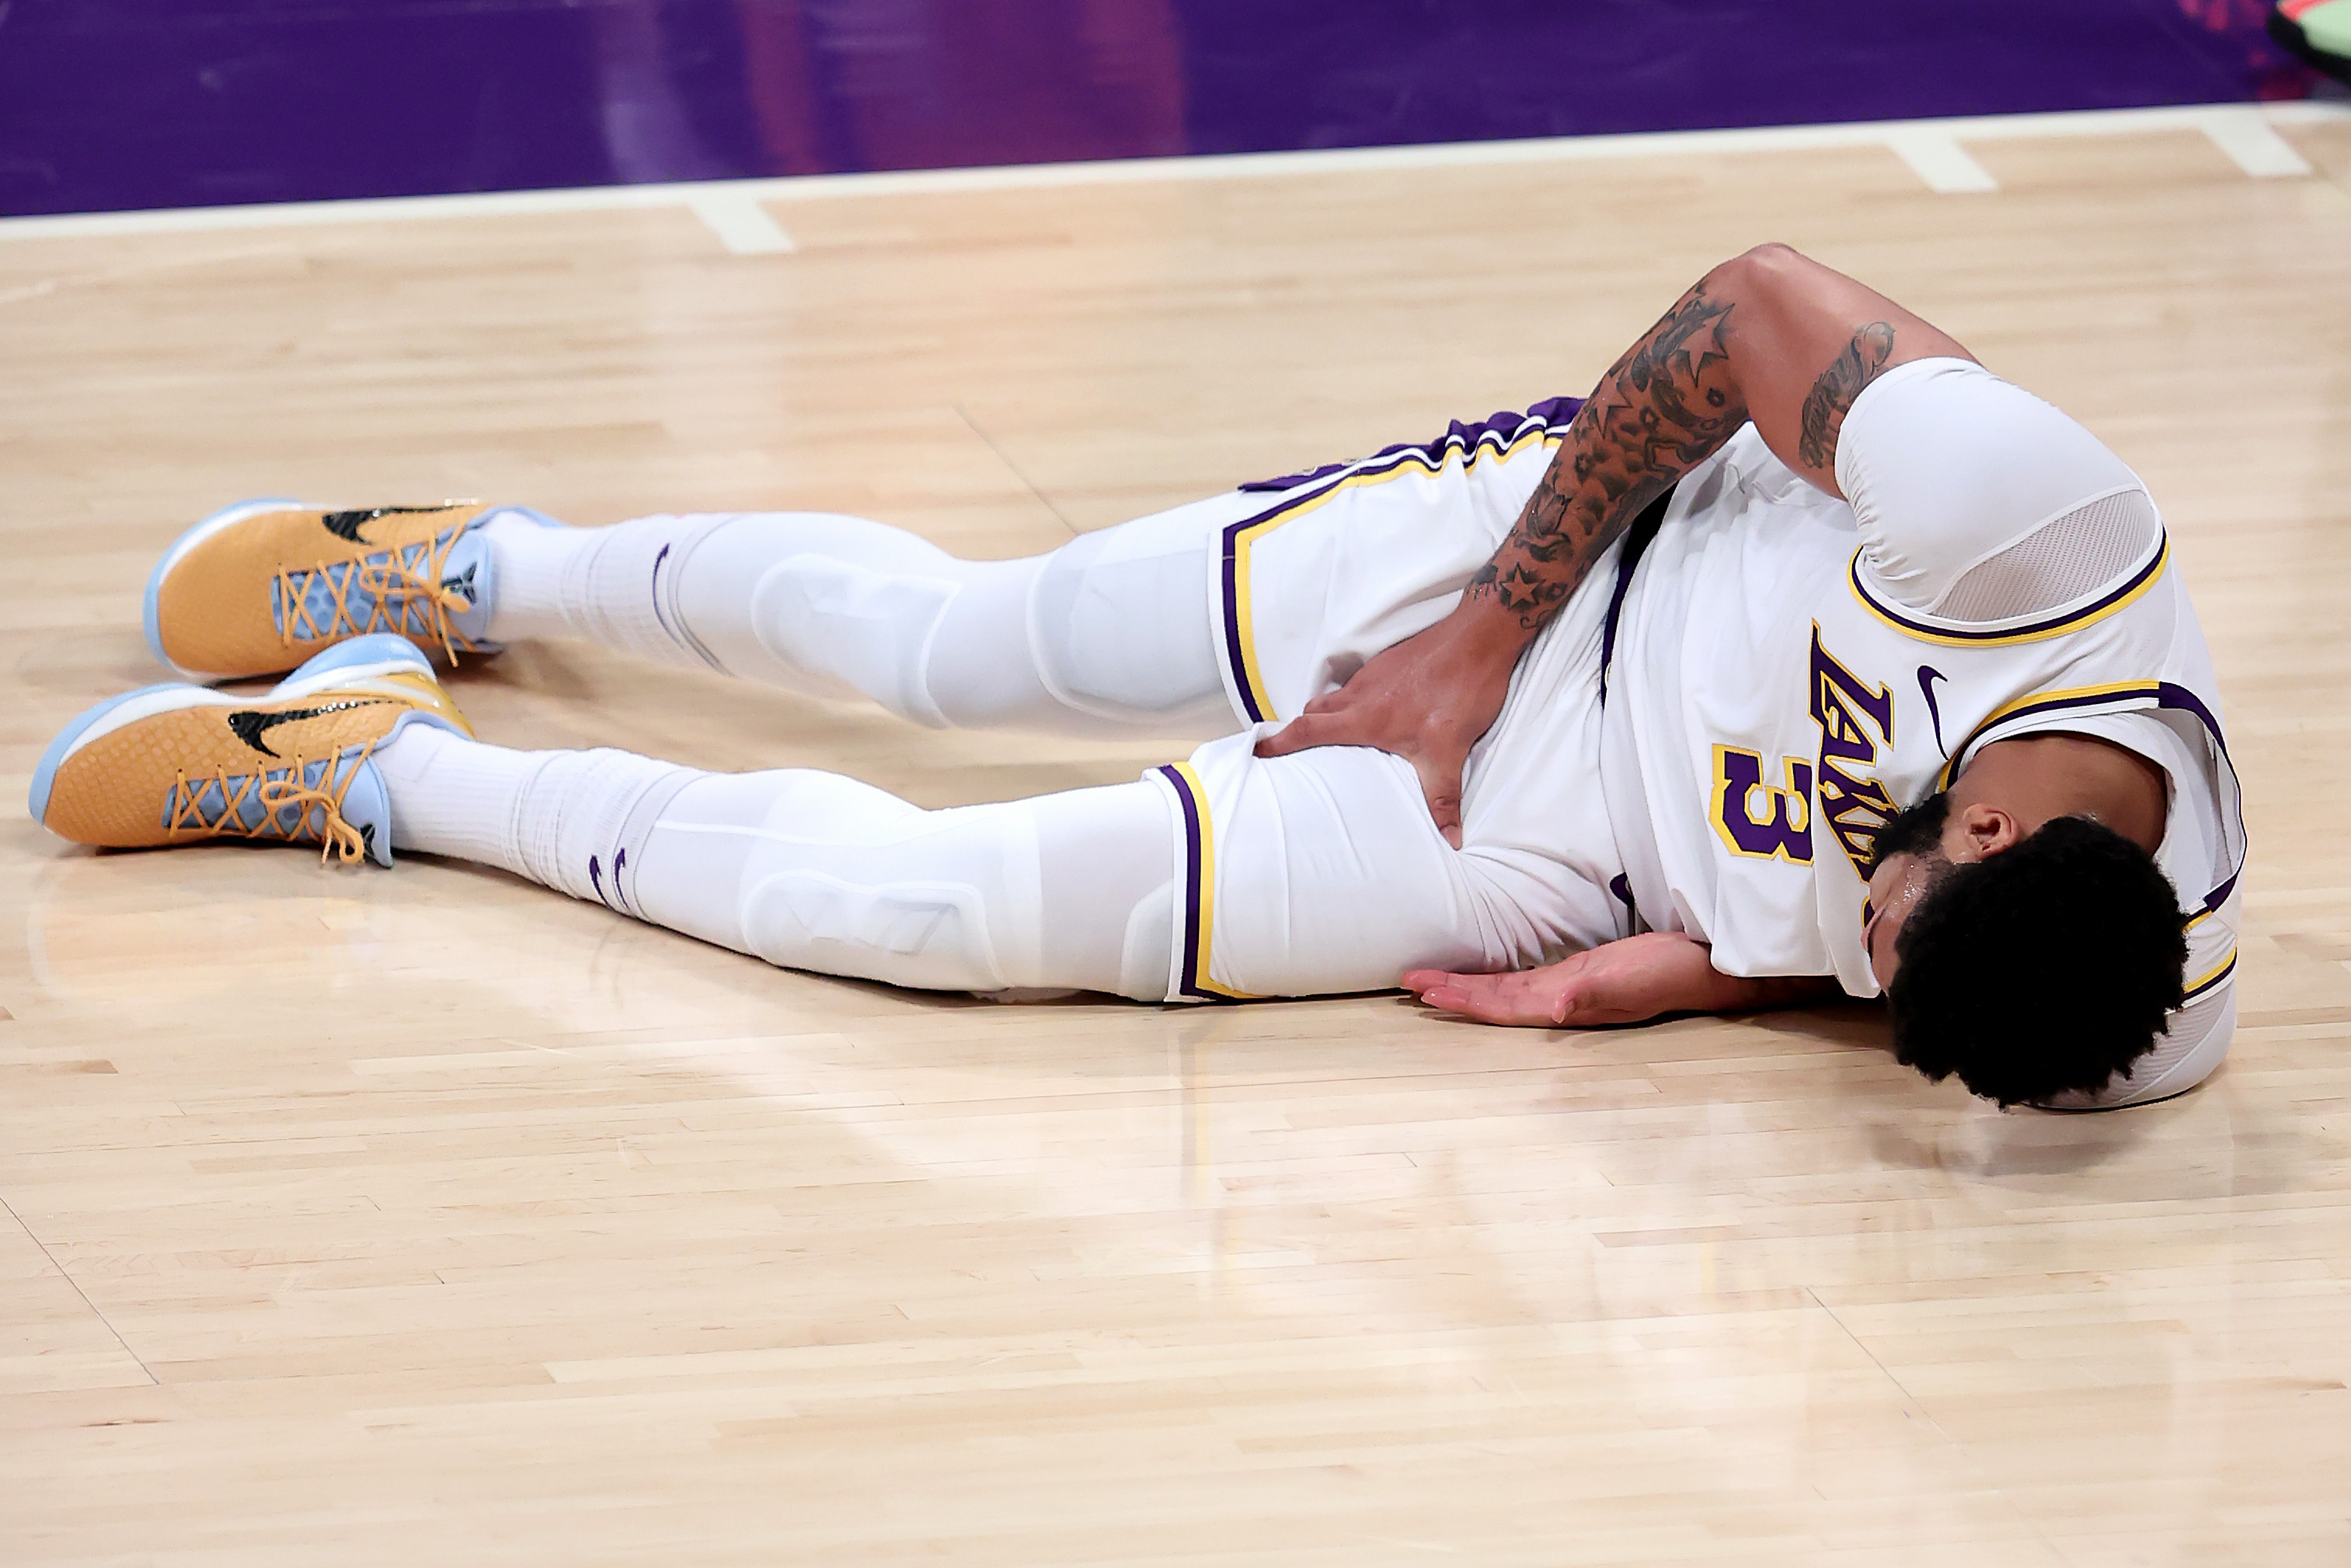 Anthony Davis' injury thrusts the Lakers' focal point back to